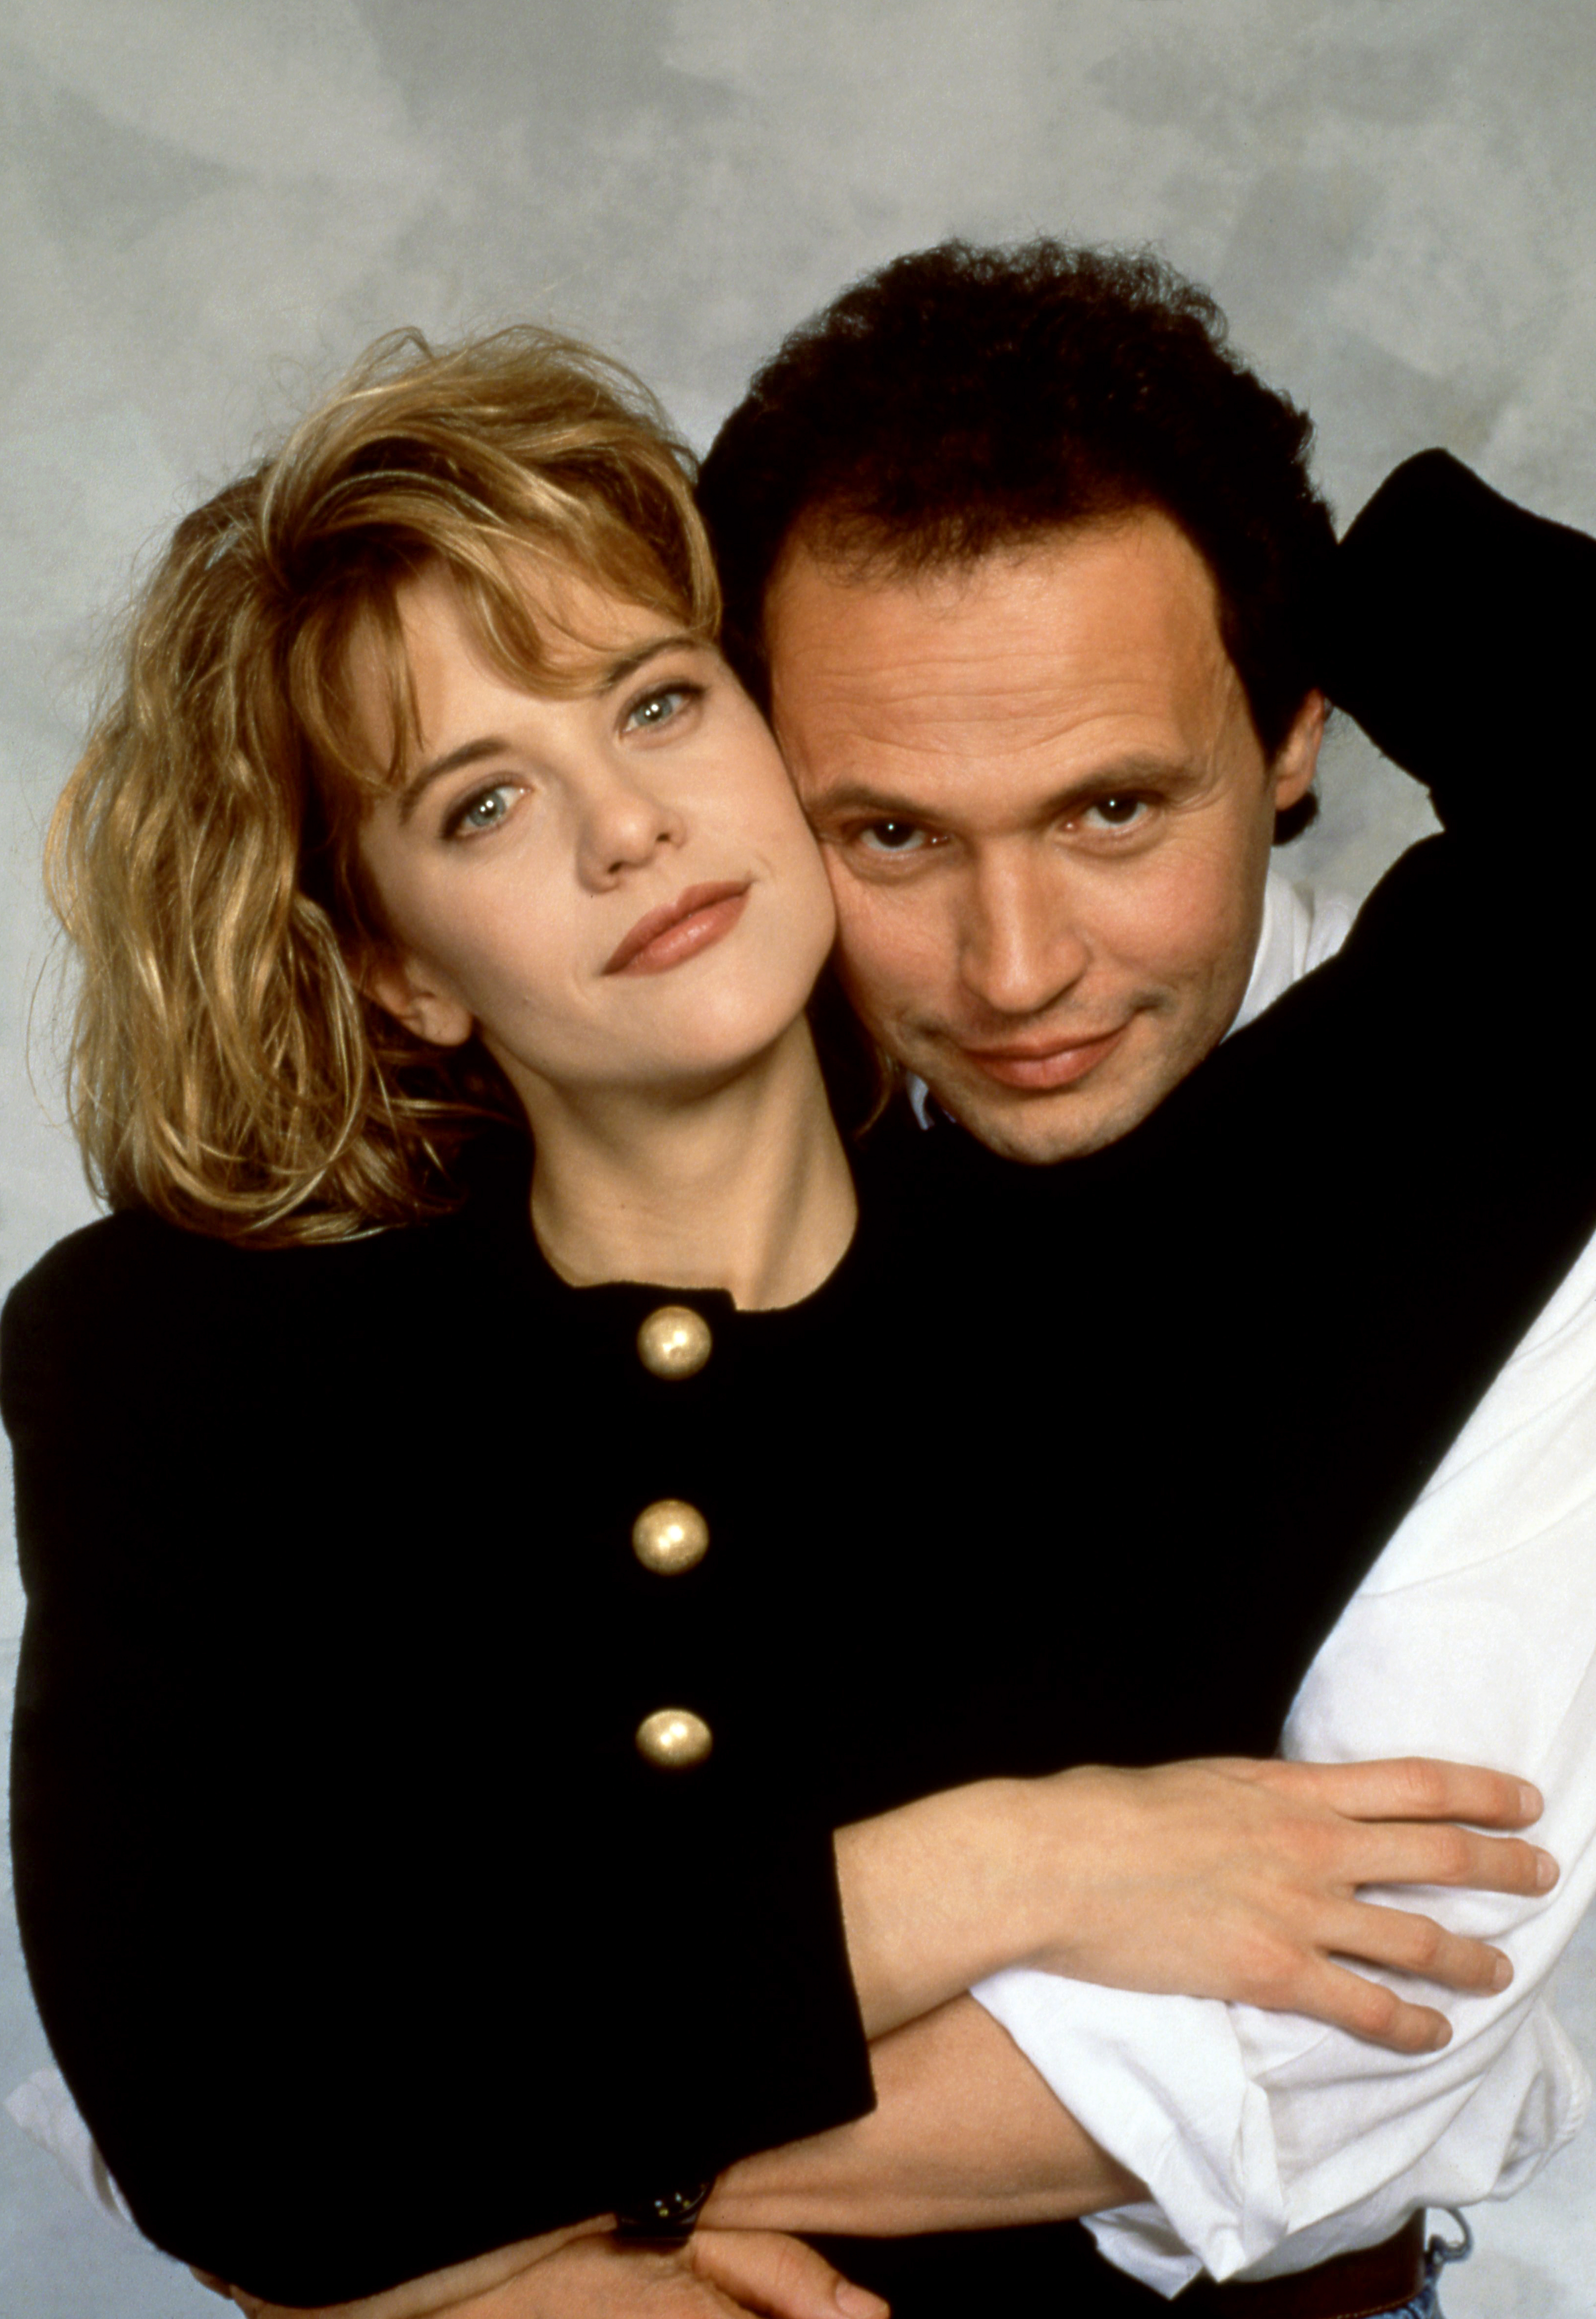 Meg Ryan and Billy Crystal pose for a portrait in Los Angeles, California, circa 1989. | Source: Getty Images